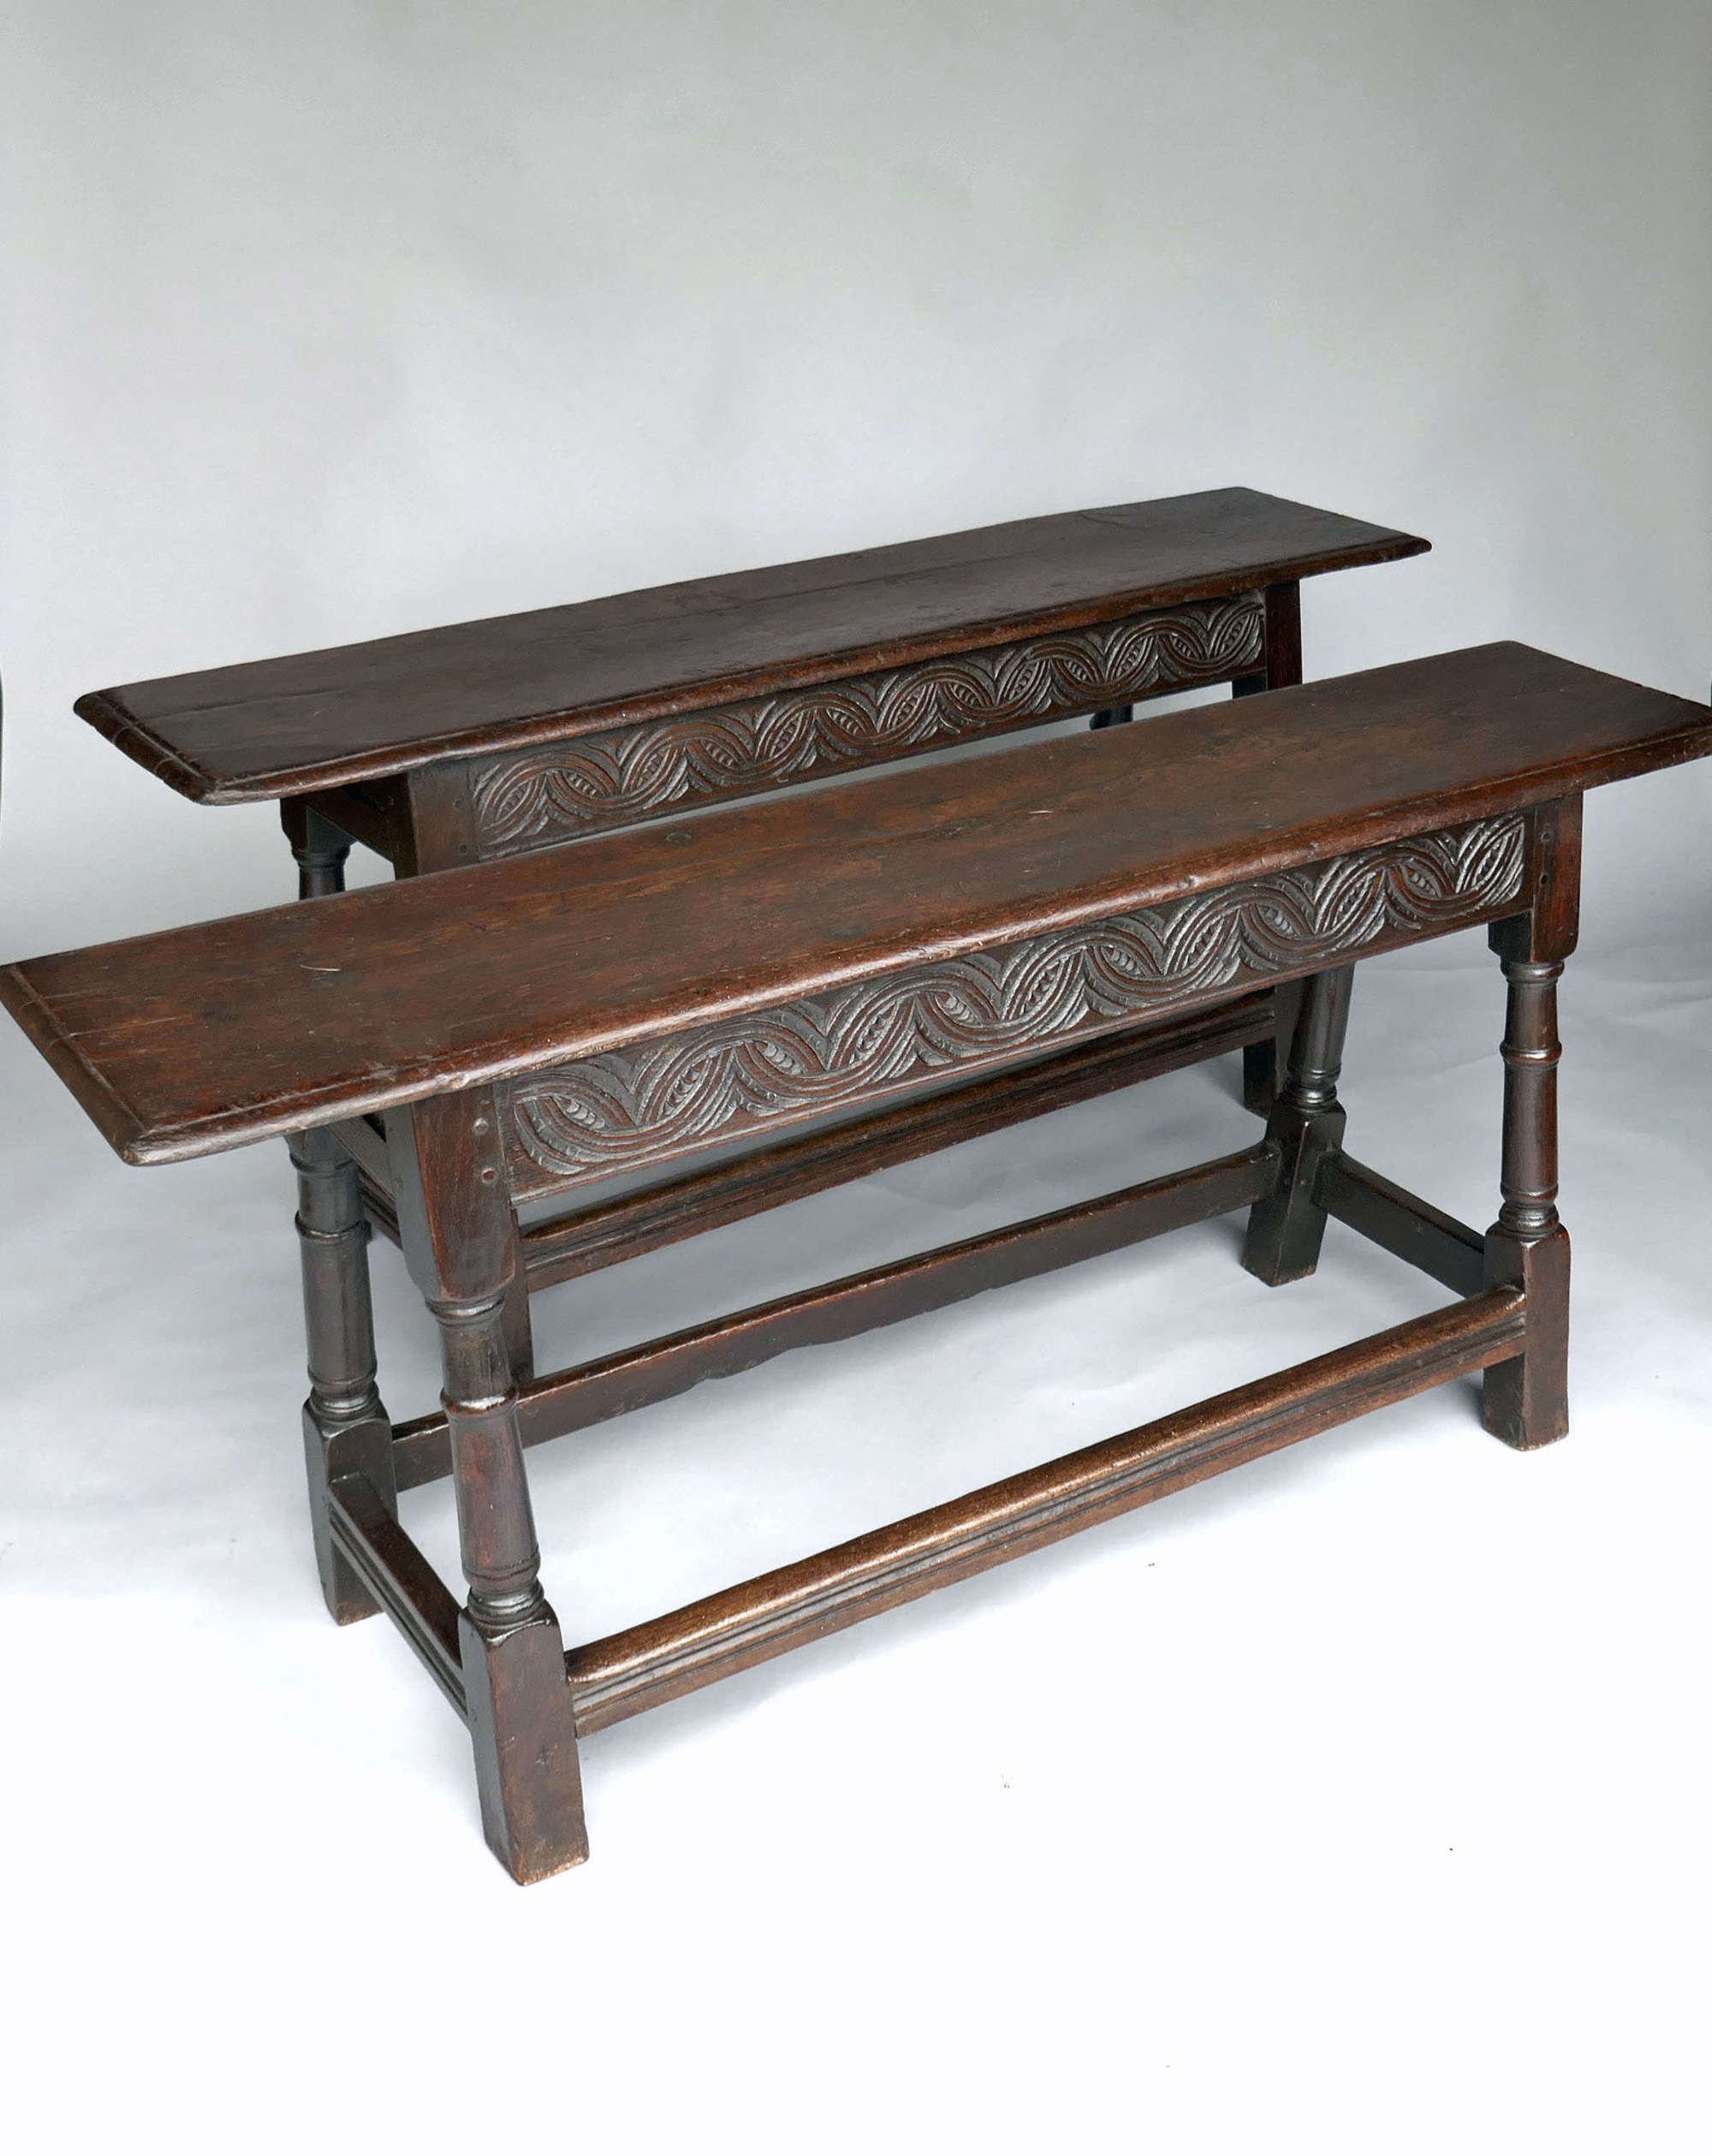 Antique Early English Furniture 17thc Pair Of Oak Joyned Benches.